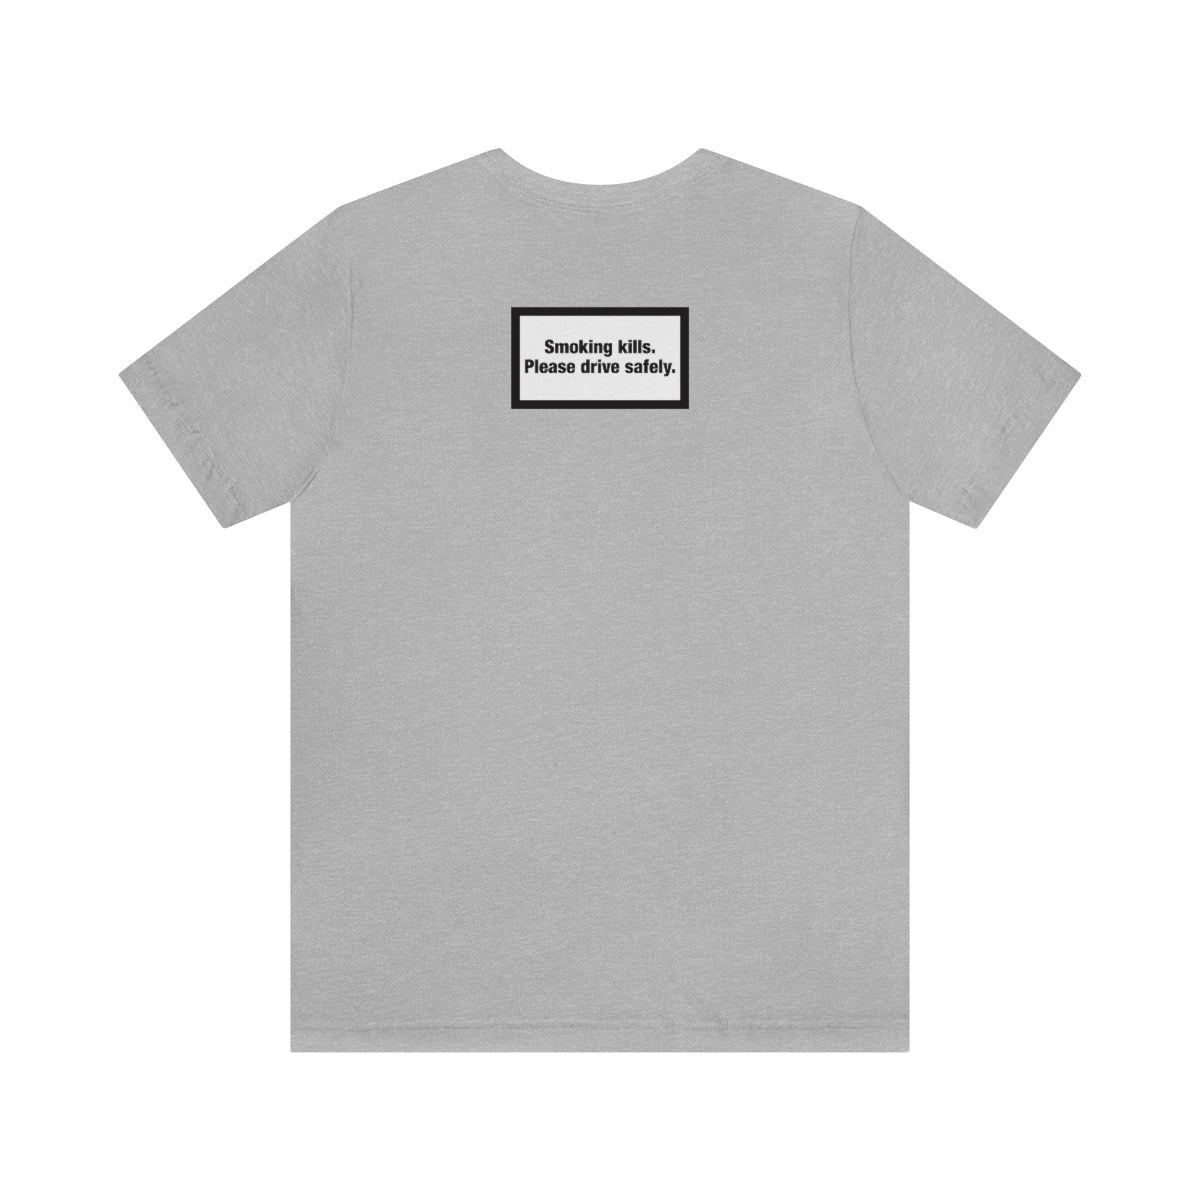 Extra Dry - ultra cotton tee